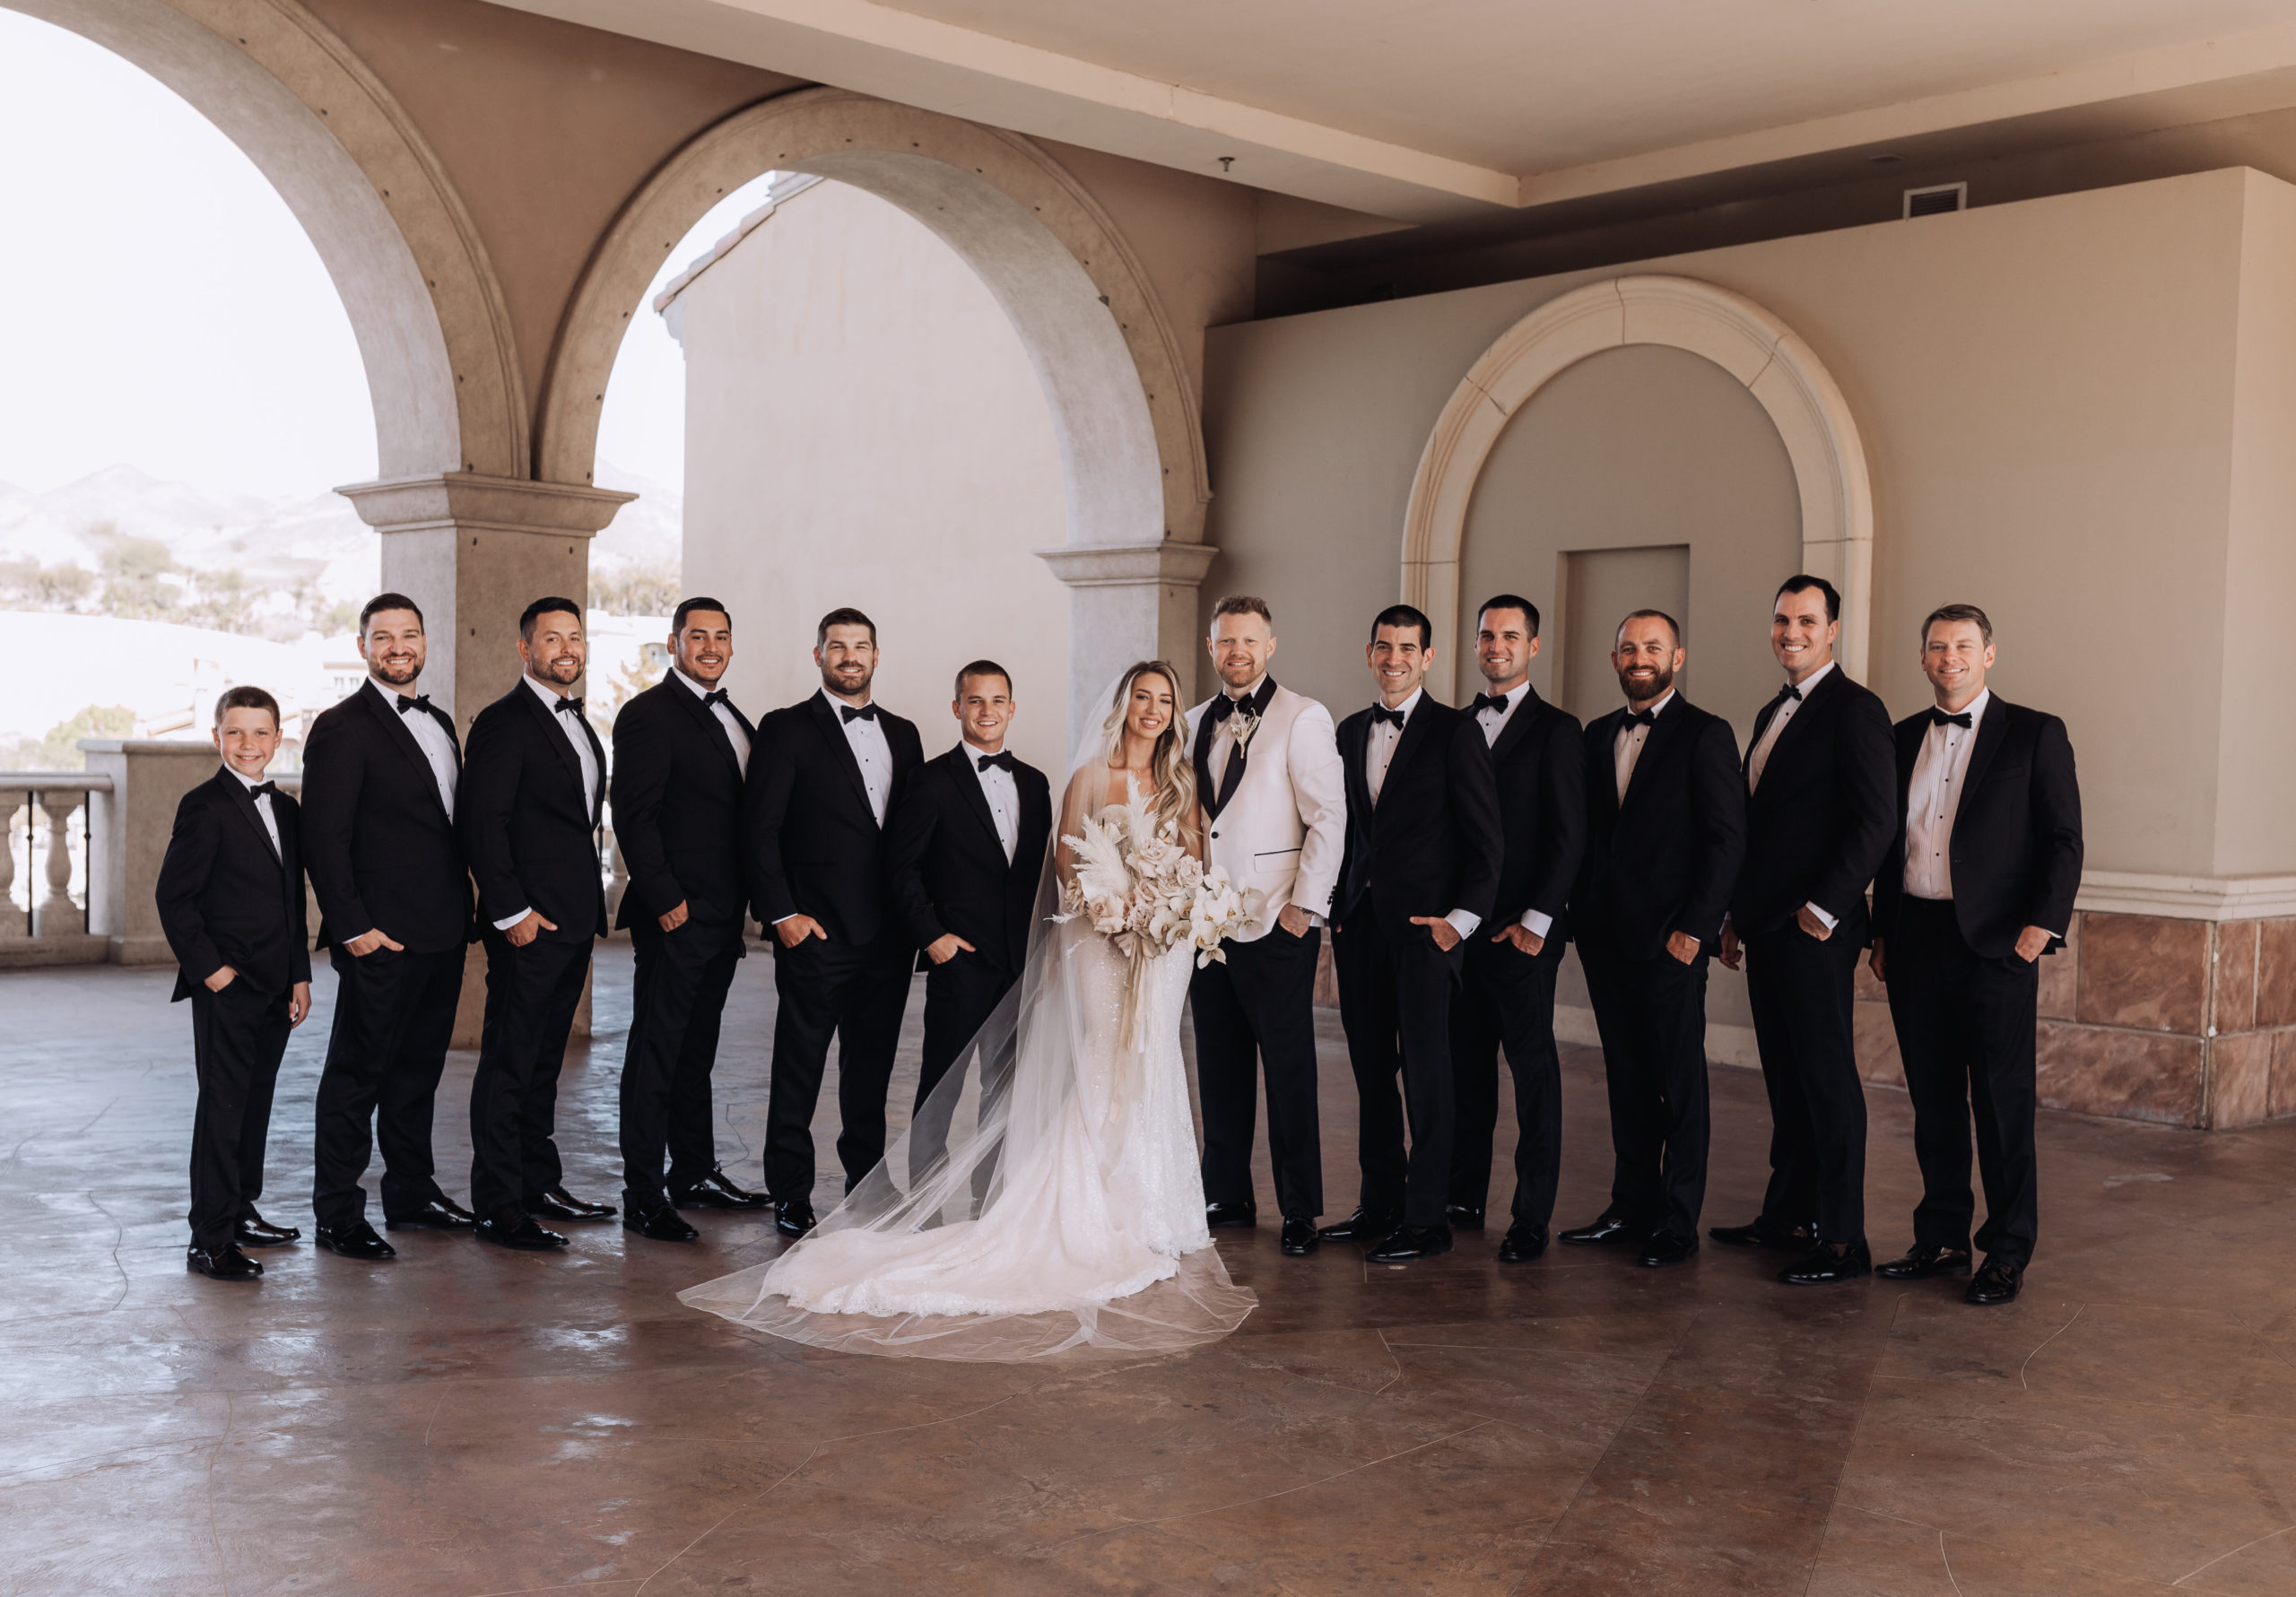 Lake Las Vegas Meets Modern Boho Bride. Newlyweds take a photo with the best man and grooms men on the bride at the Hilton at lake Las Vegas 